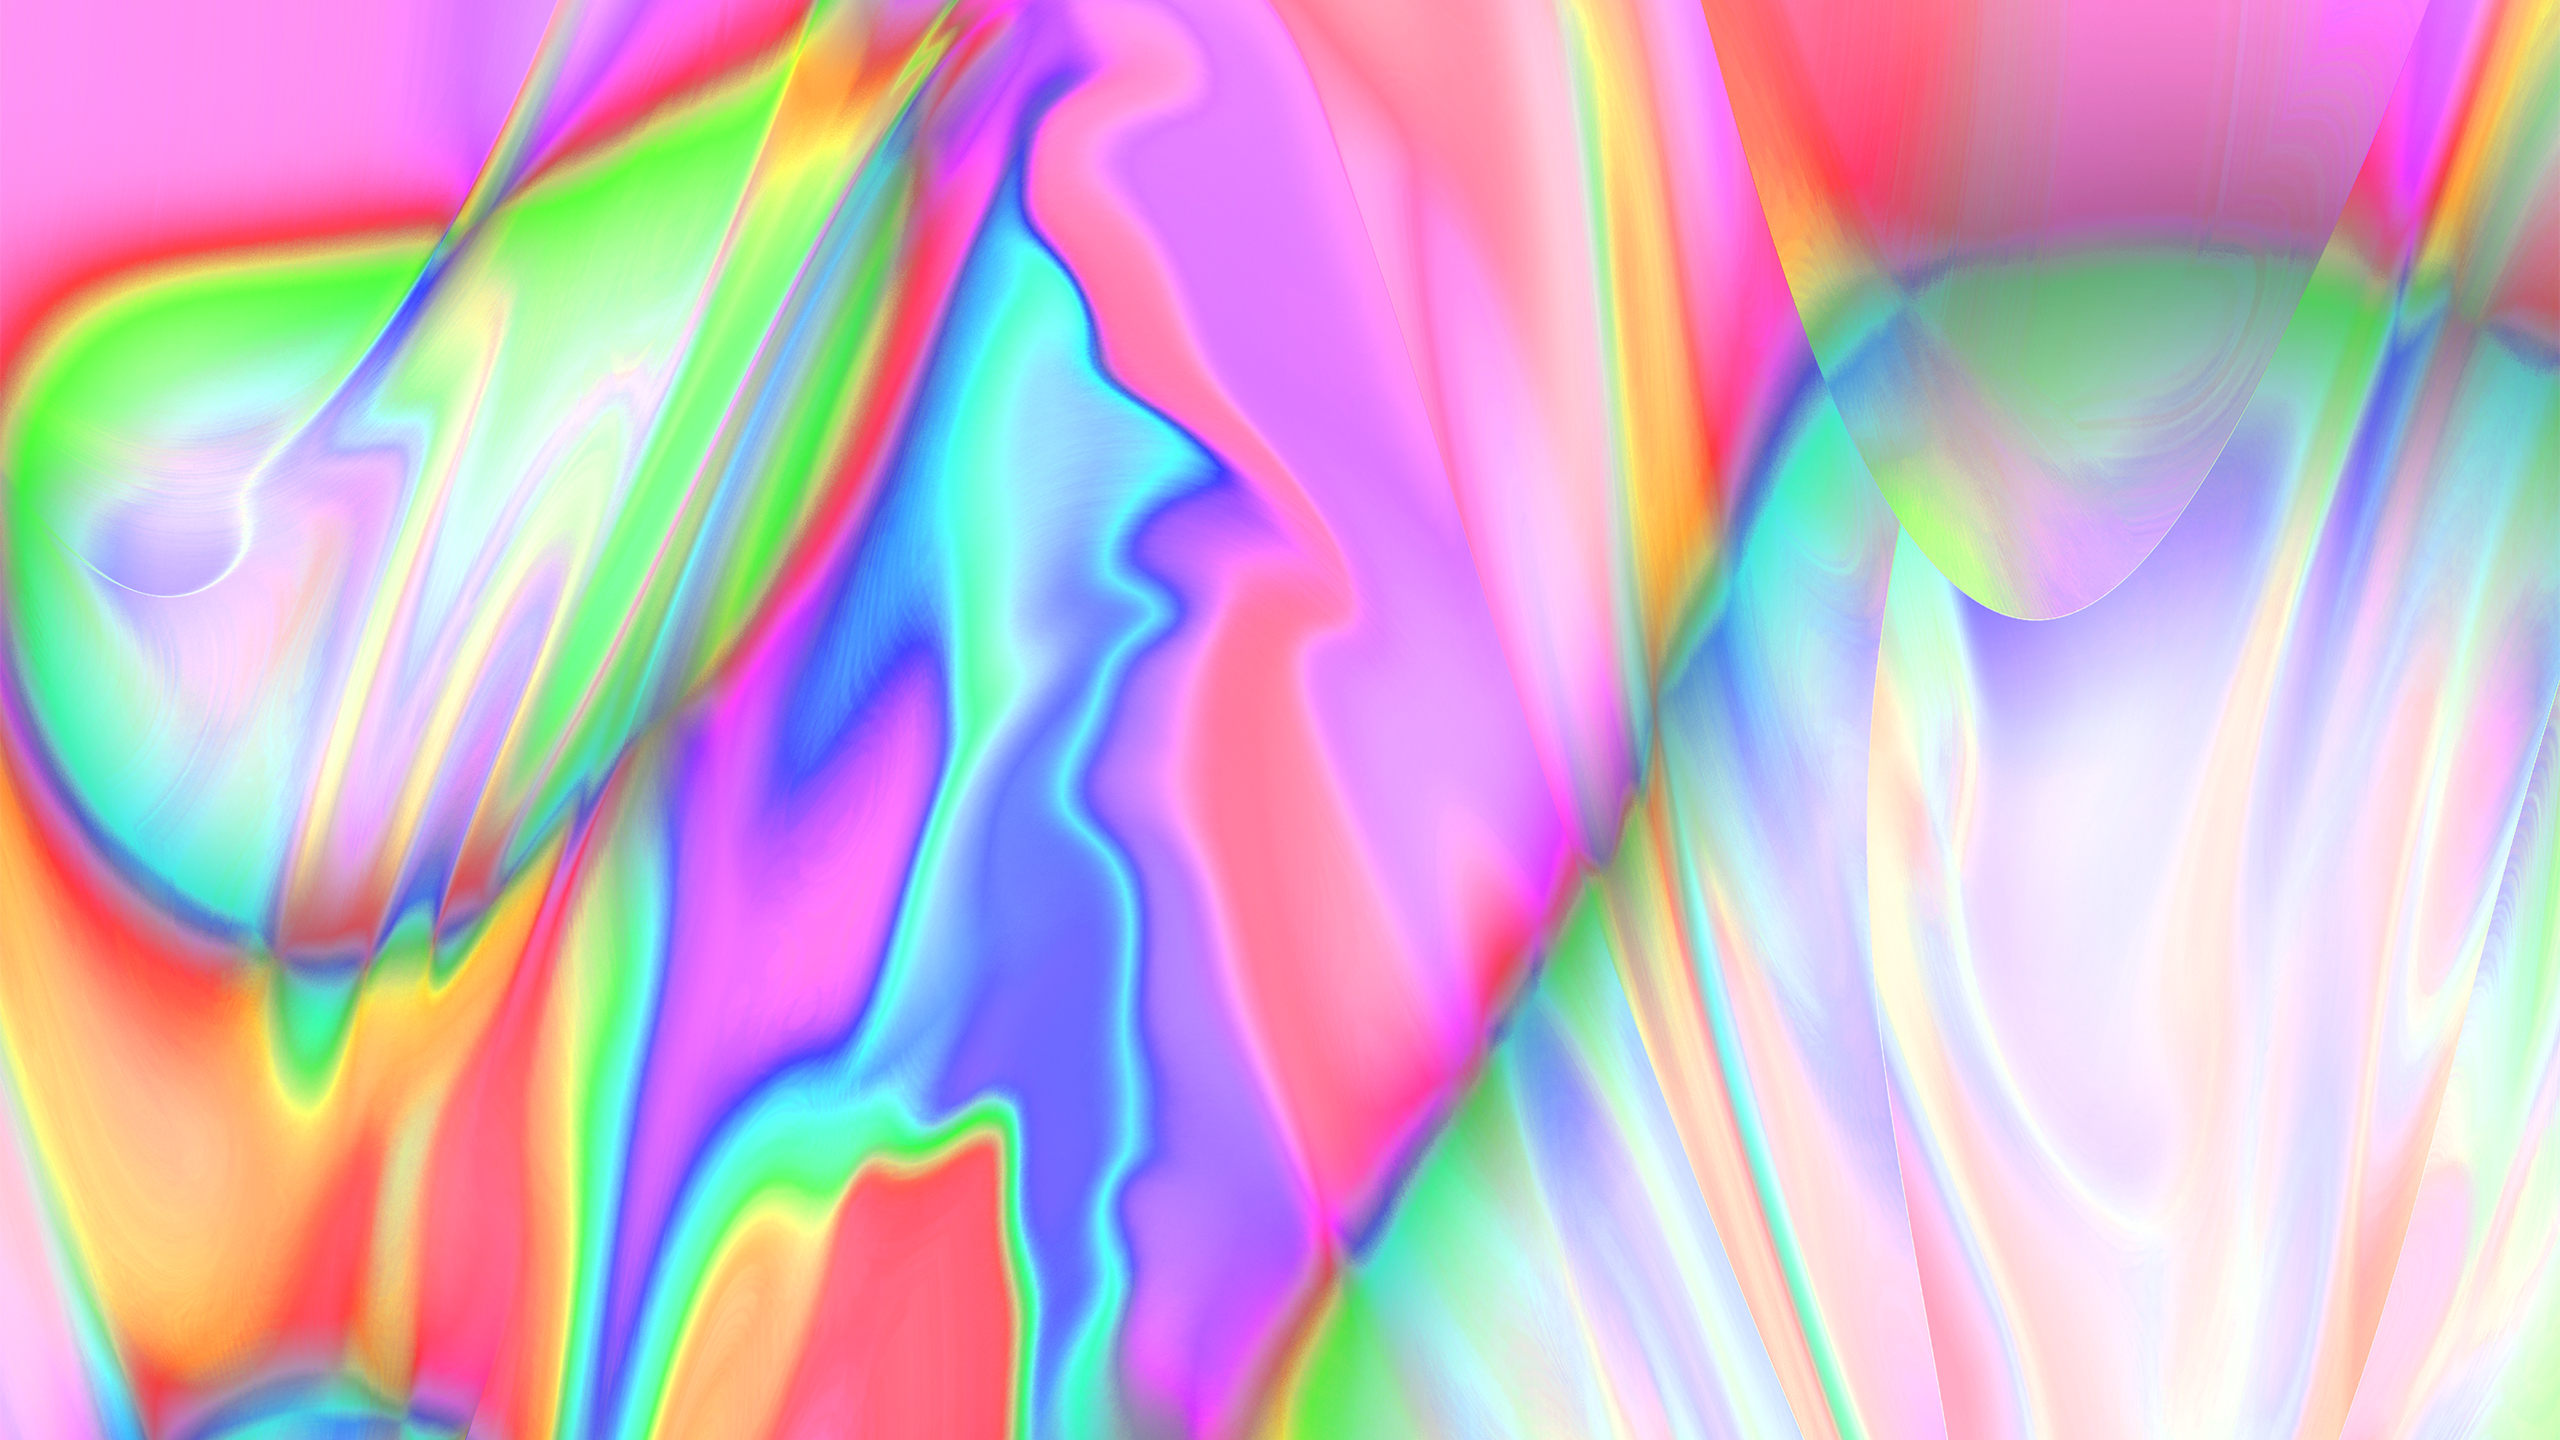 Abstract Photoshop Colorful Holographic Iridescent Liquid Gradient Graphic Design 2560x1440